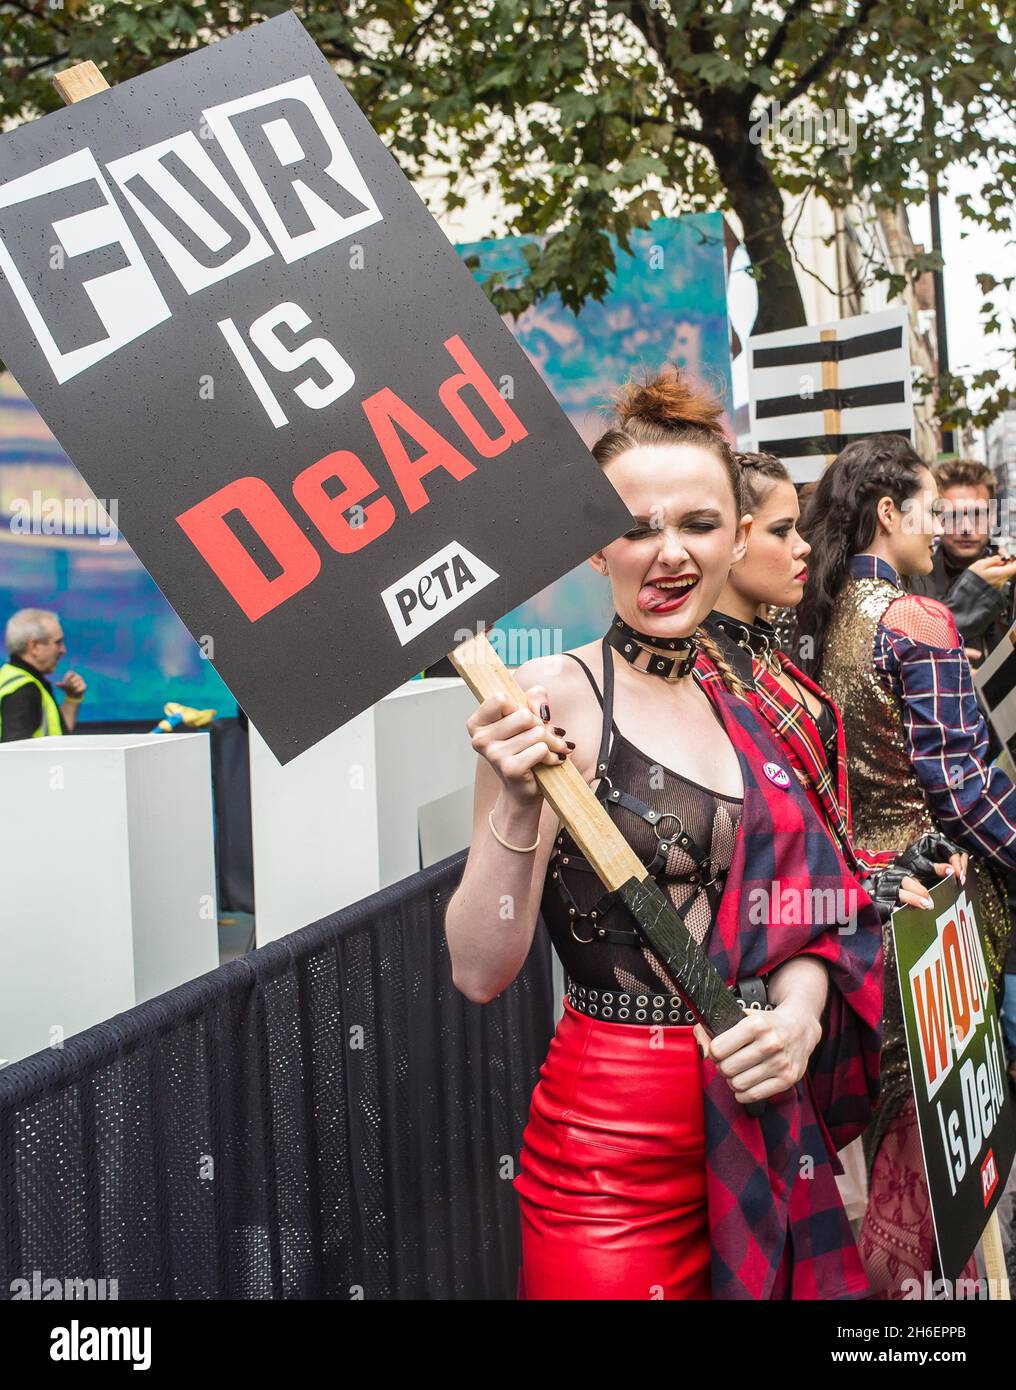 As London celebrates 40 years of punk, PETA activists showed up at the opening of London Fashion Week urging designers to get behind the next style revolution â€“ fashion that doesnâ€™t harm animals. Stock Photo